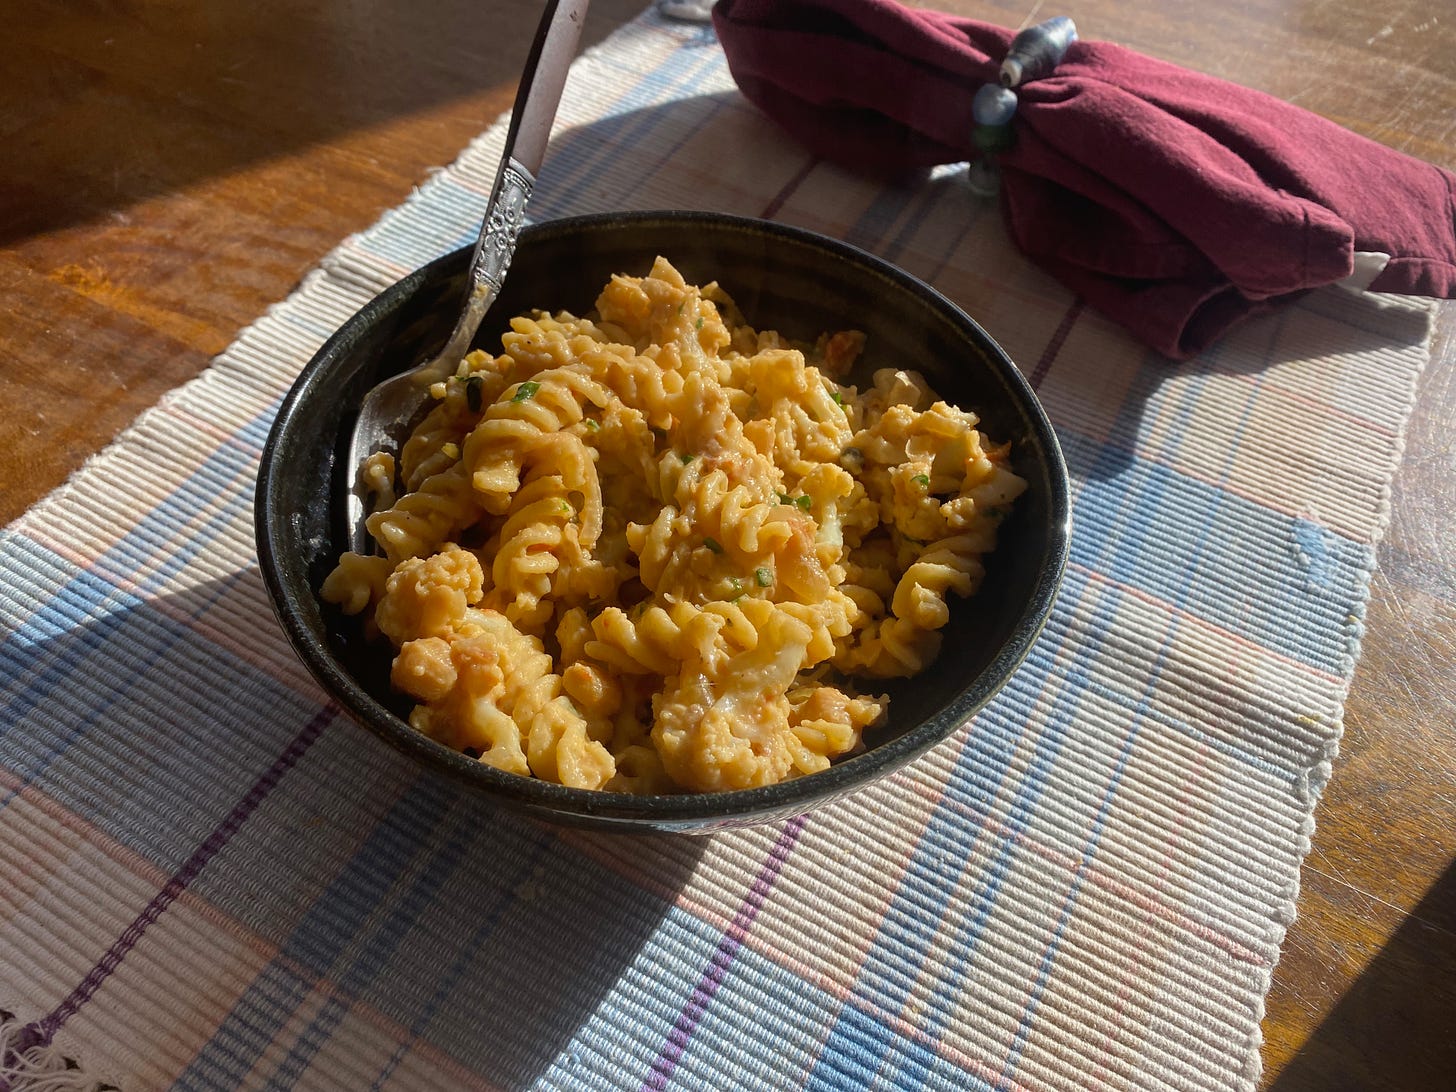 A ceramic bowl of chickpea pasta sitting on a woven placemat next to a red napkin on a sunny table.